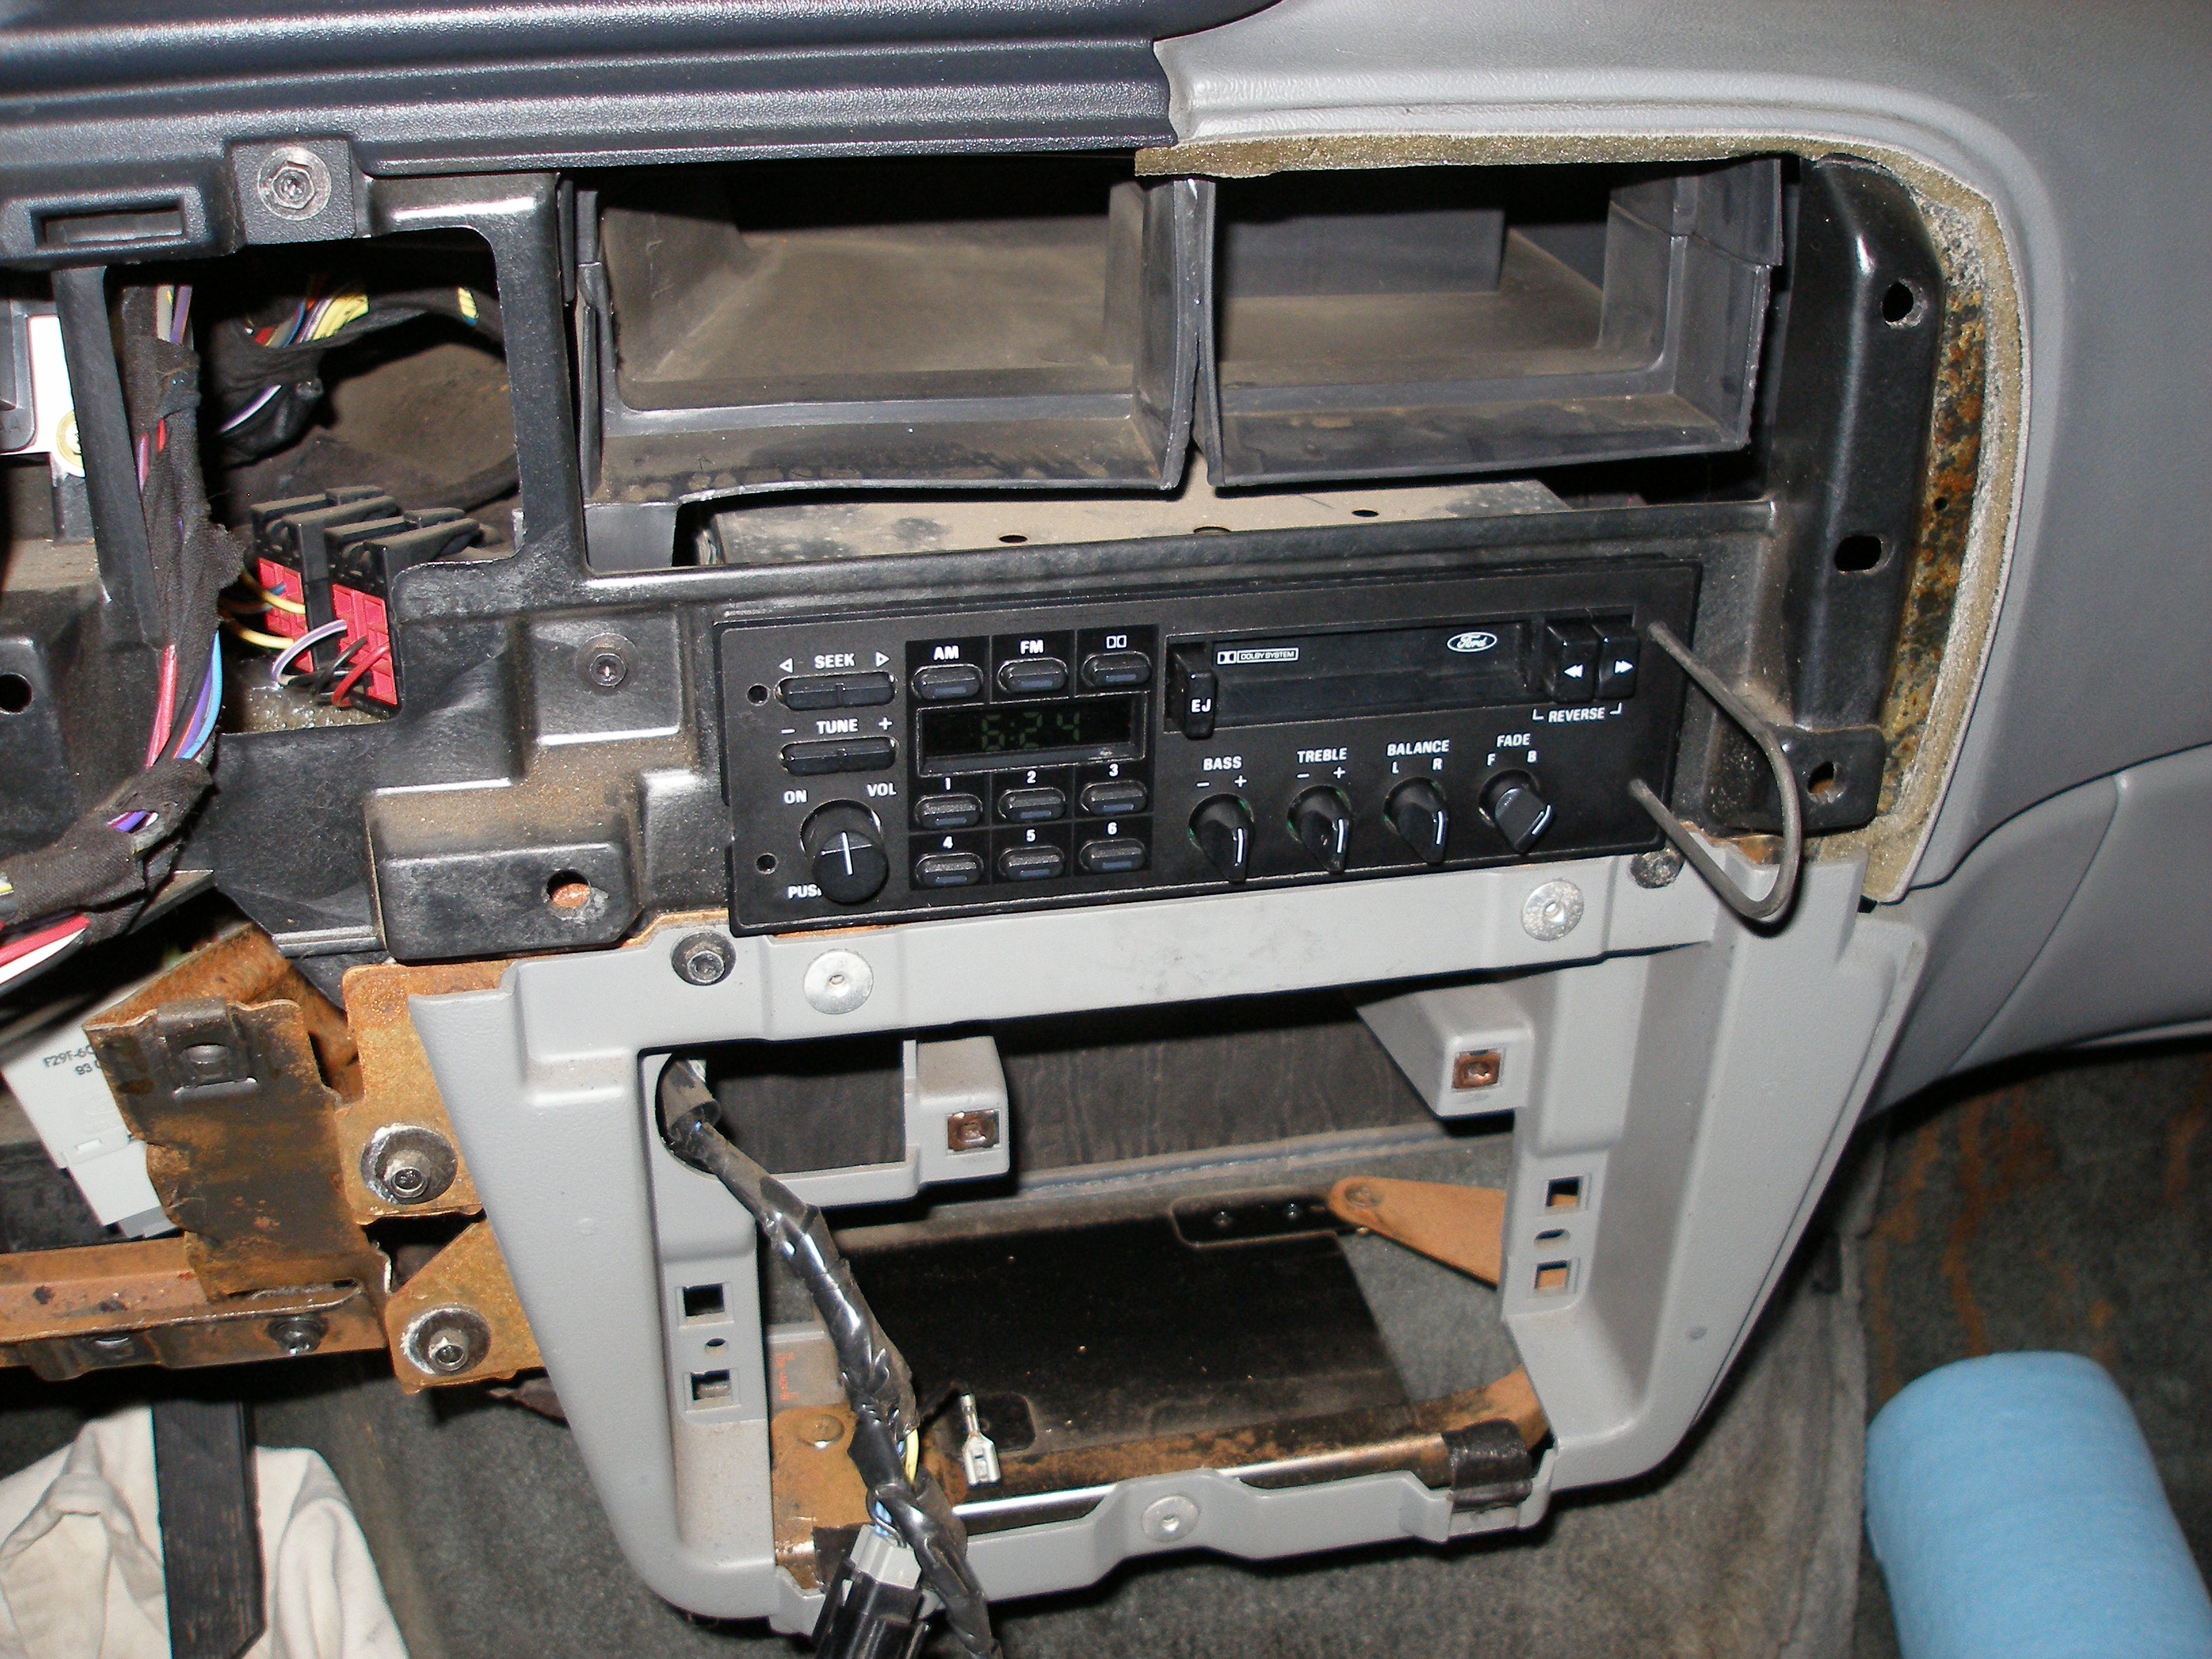 [1994 Ford Aerostar Dashboard Light Replacement] - 1990 ... 92 ford ranger stereo wiring diagram 